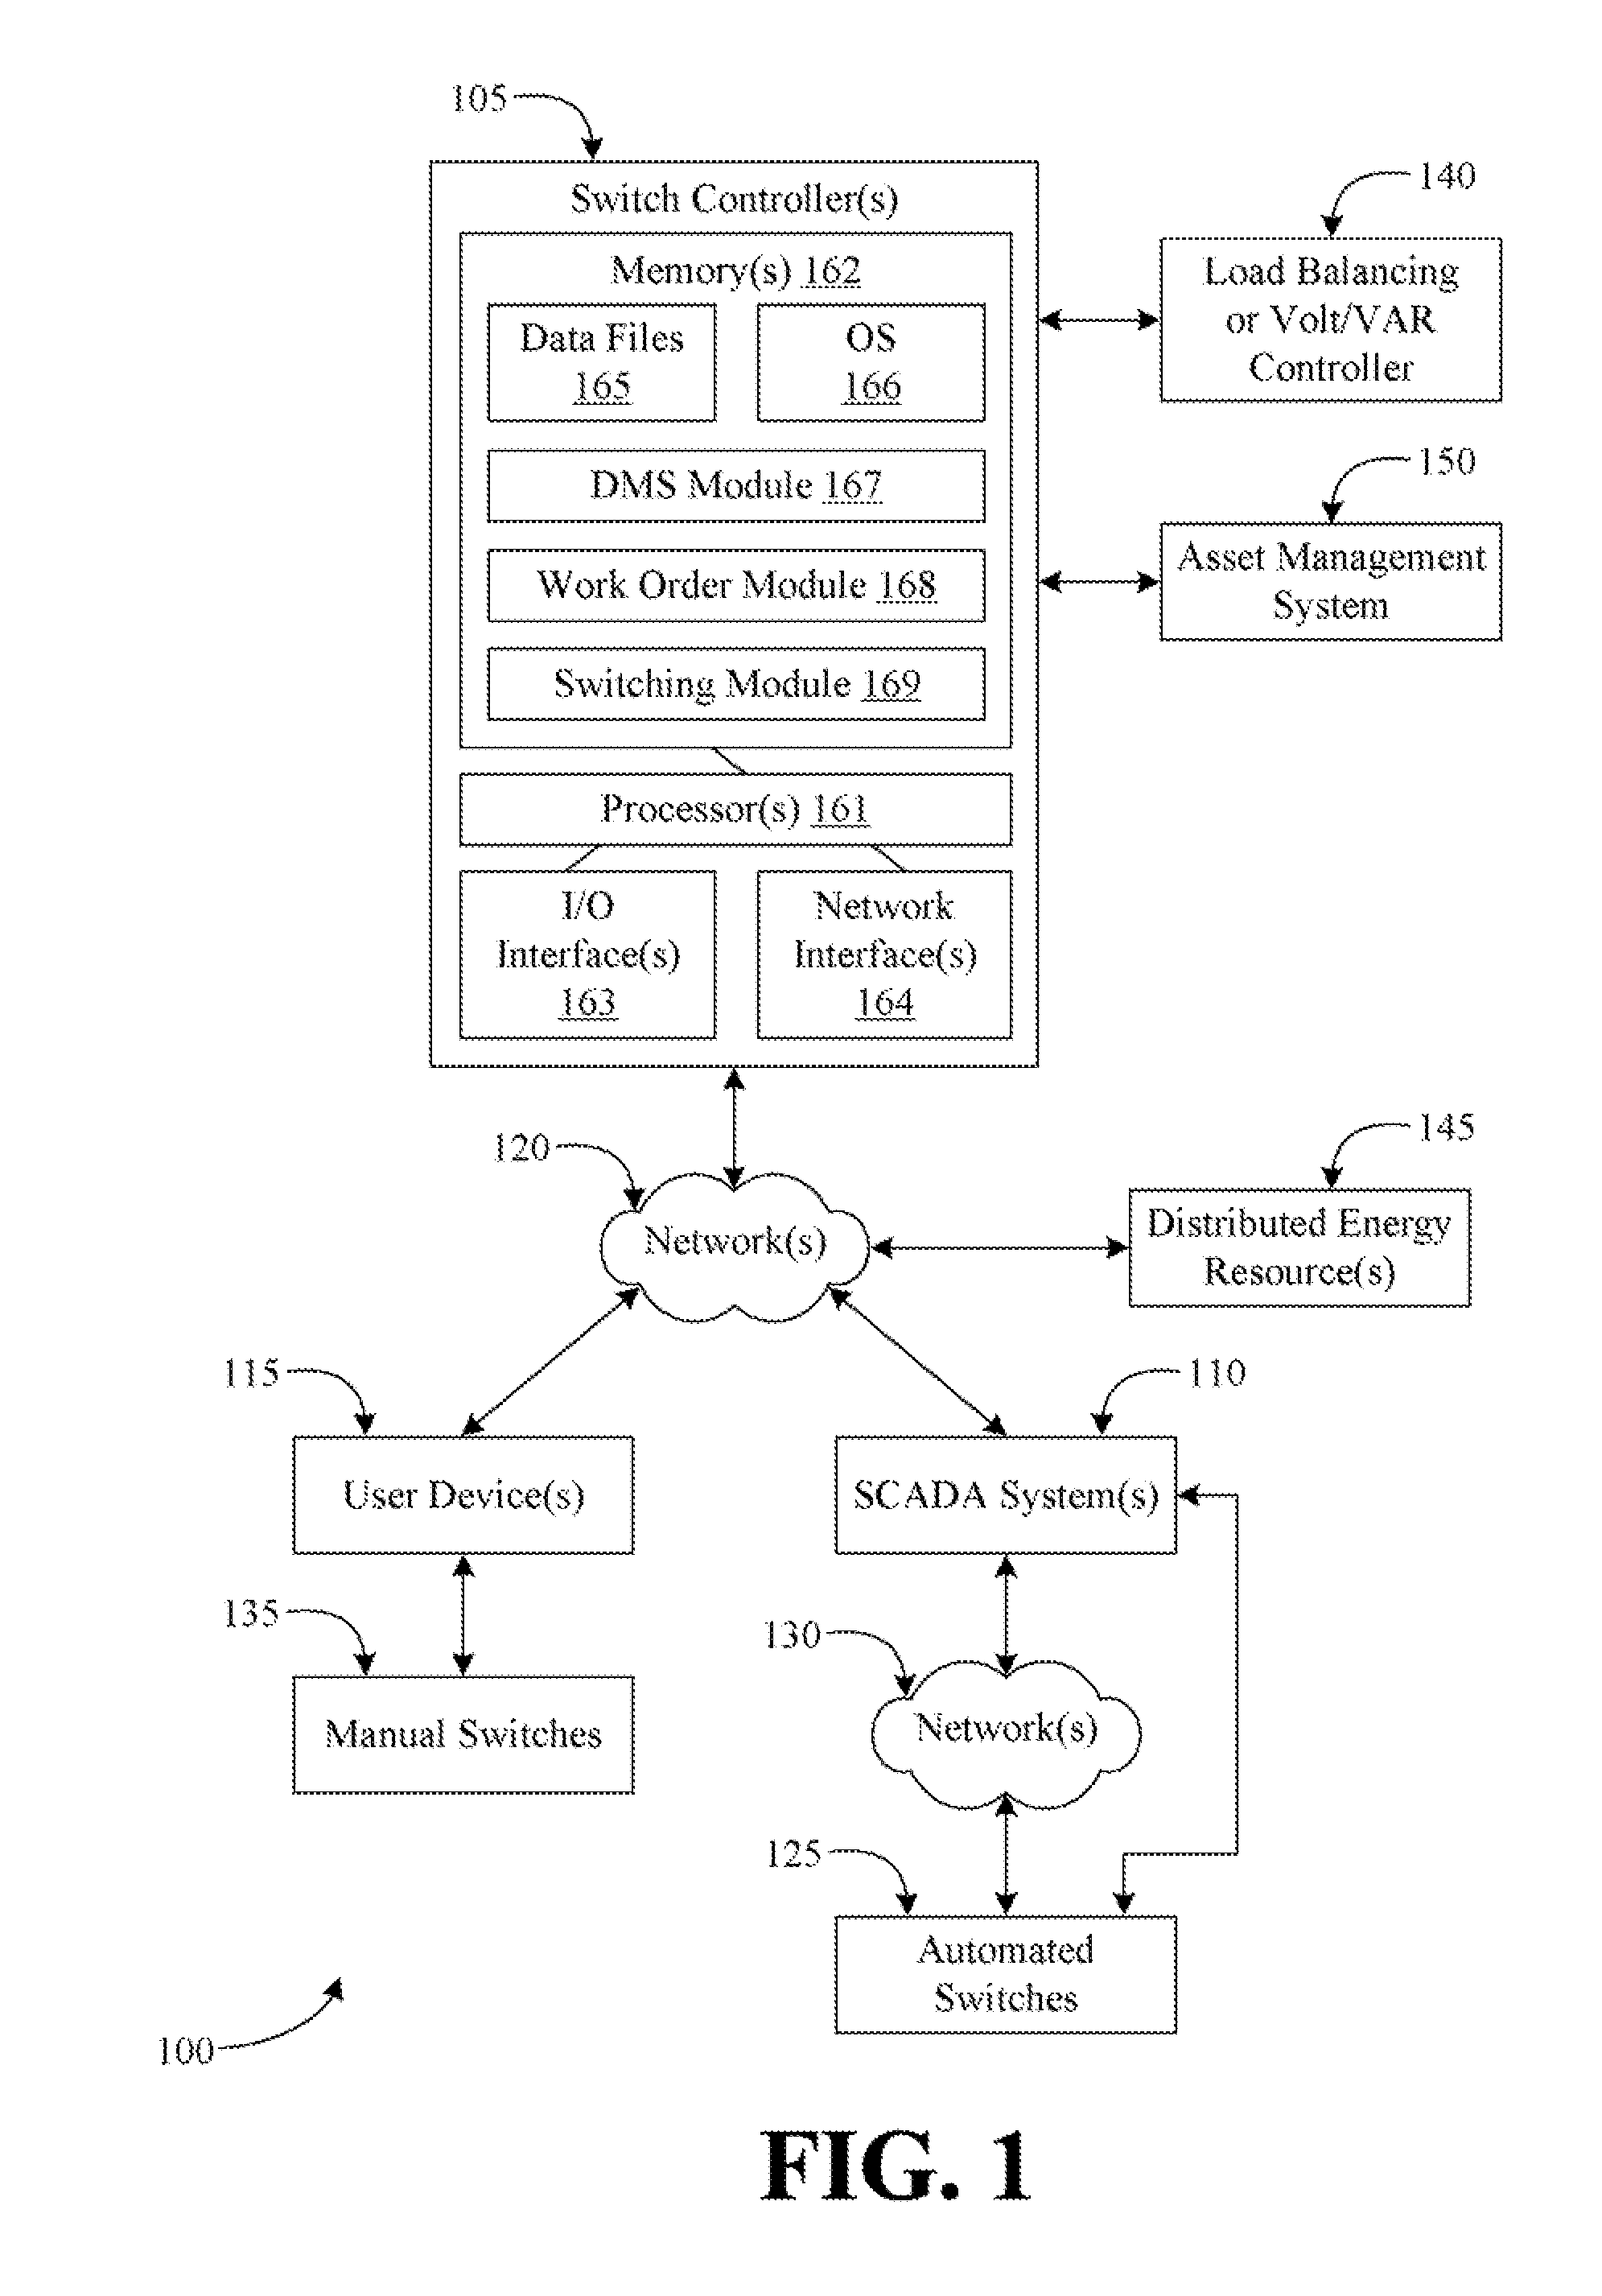 Systems and methods for synchronizing switching within a power distribution network